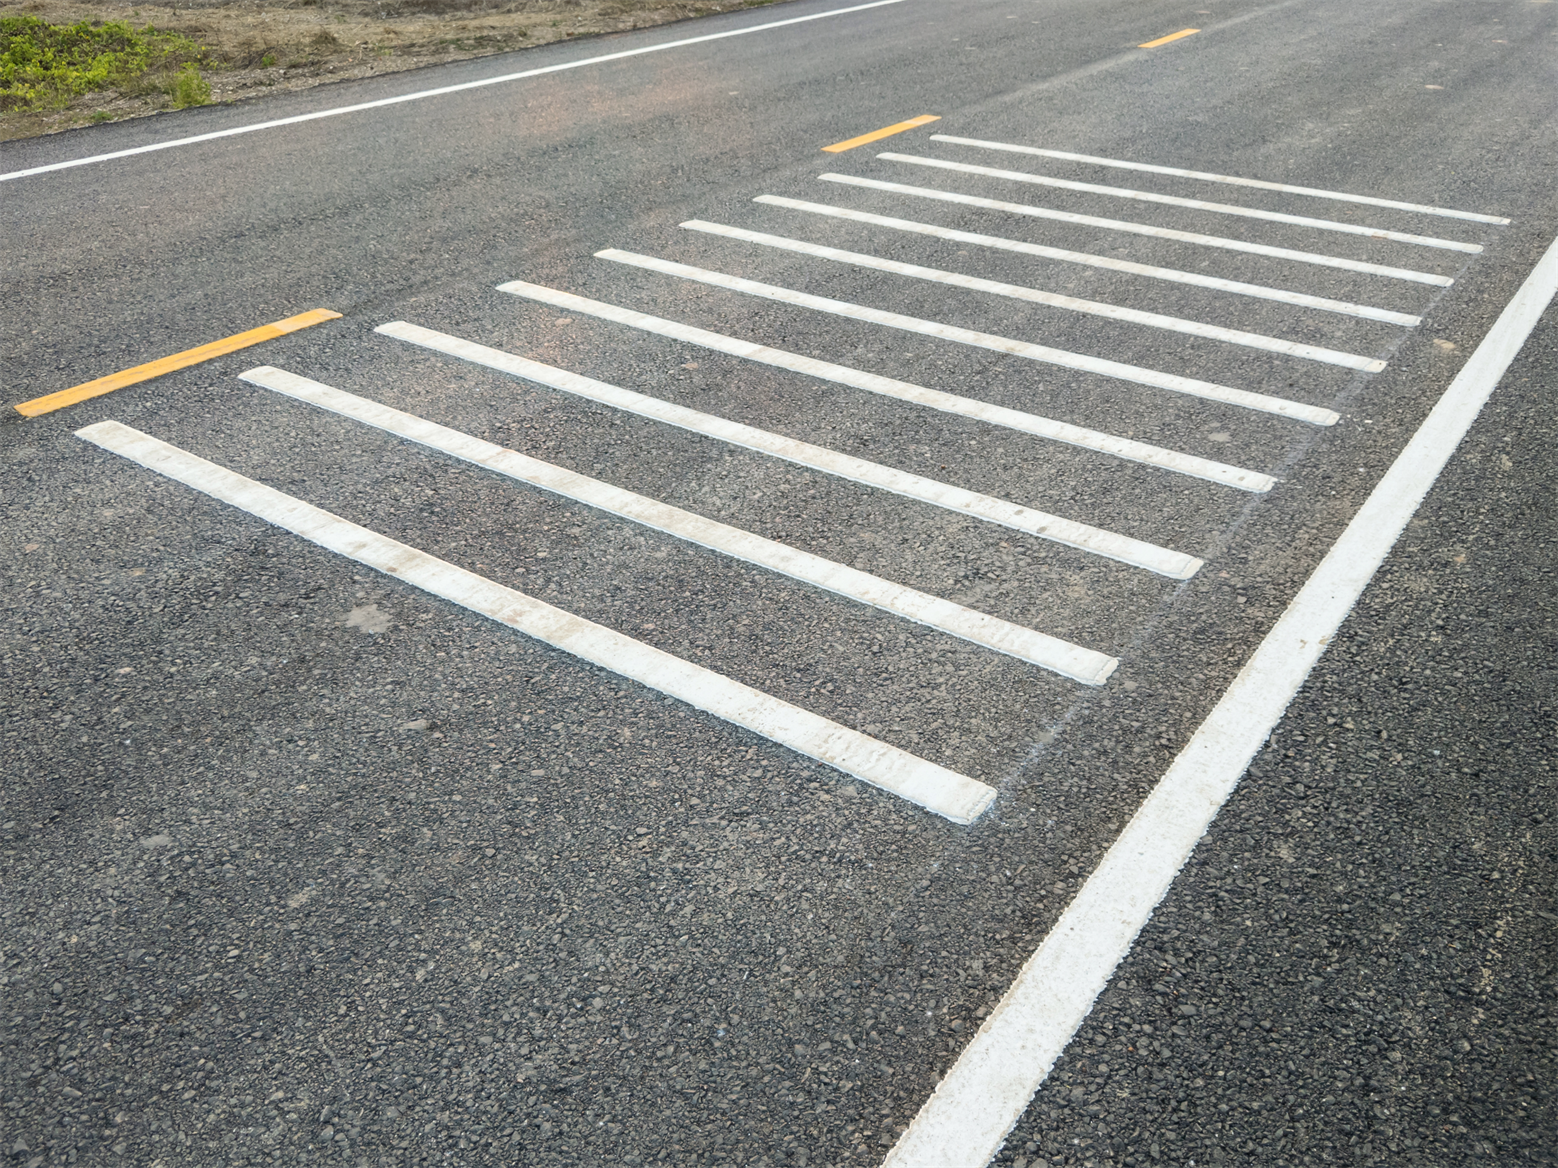 Center line, shoulder and transverse (shown above) rumble strips are patches within a roadway that warn drivers when to slow down or when they are leaving their lane. Rumble strips are a proven safety countermeasure to reduce crashes and alert drivers of changing roadway conditions.